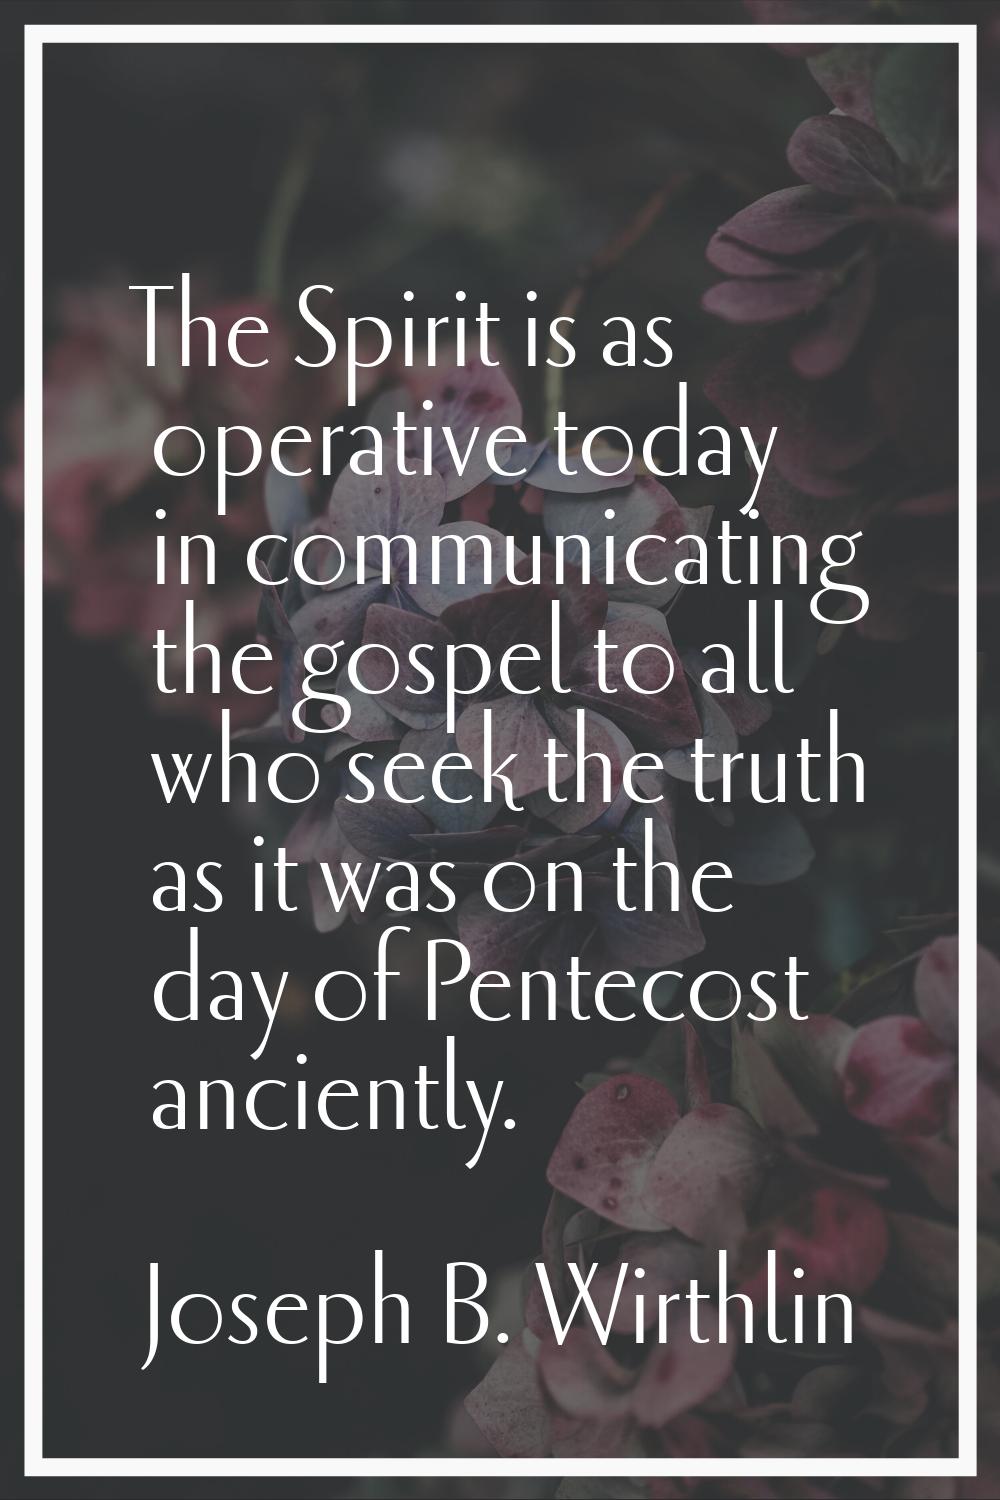 The Spirit is as operative today in communicating the gospel to all who seek the truth as it was on